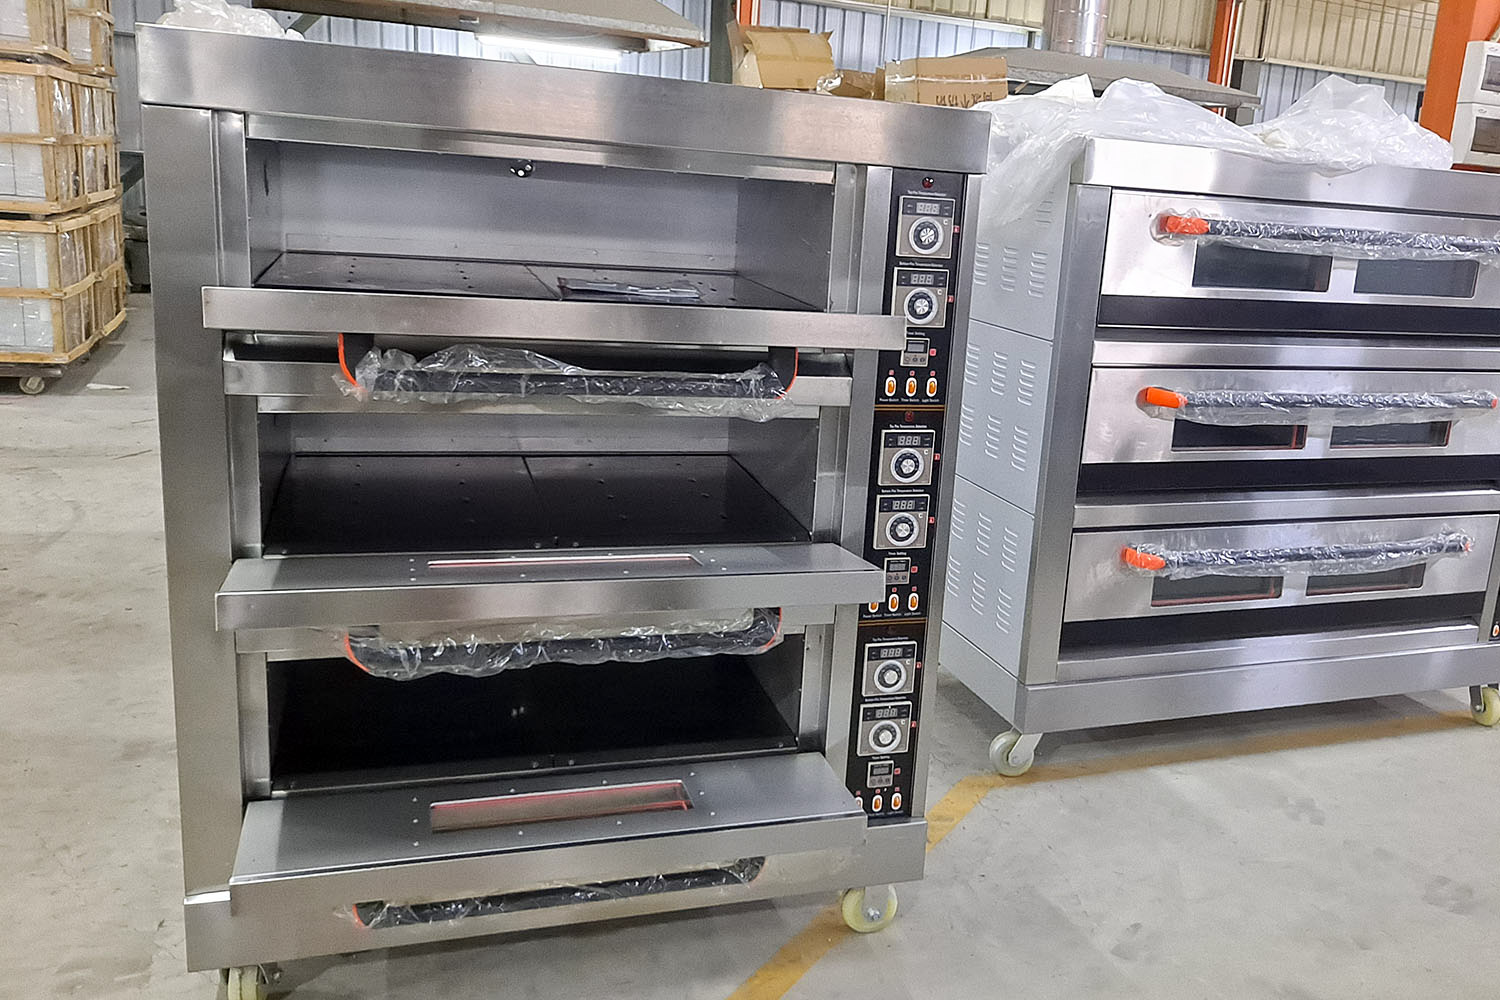 View of Baking Oven TT-O121A